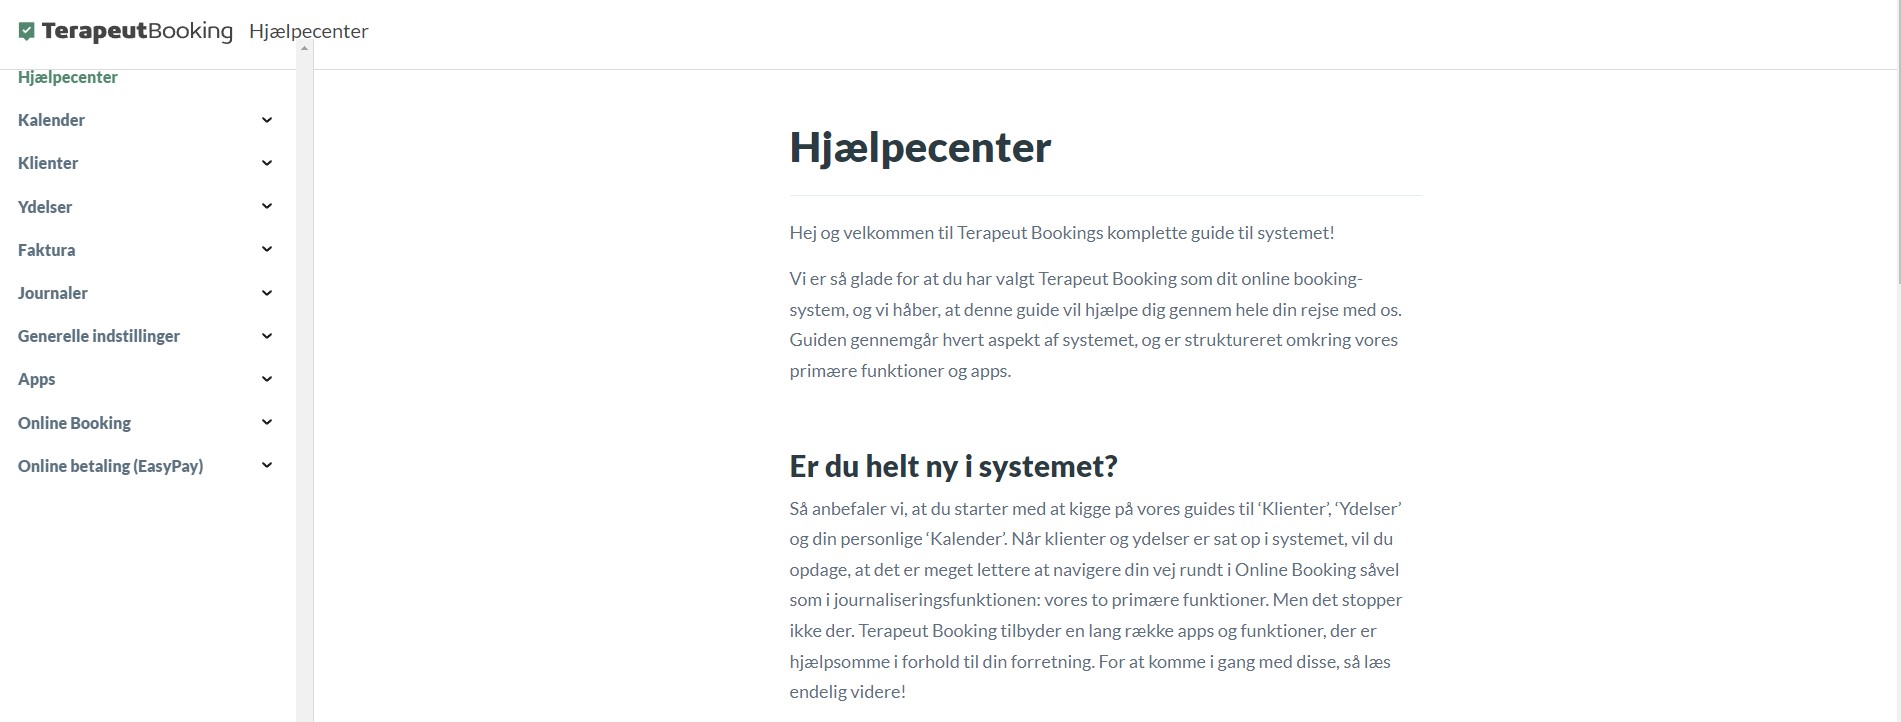 hjaelpcenter page